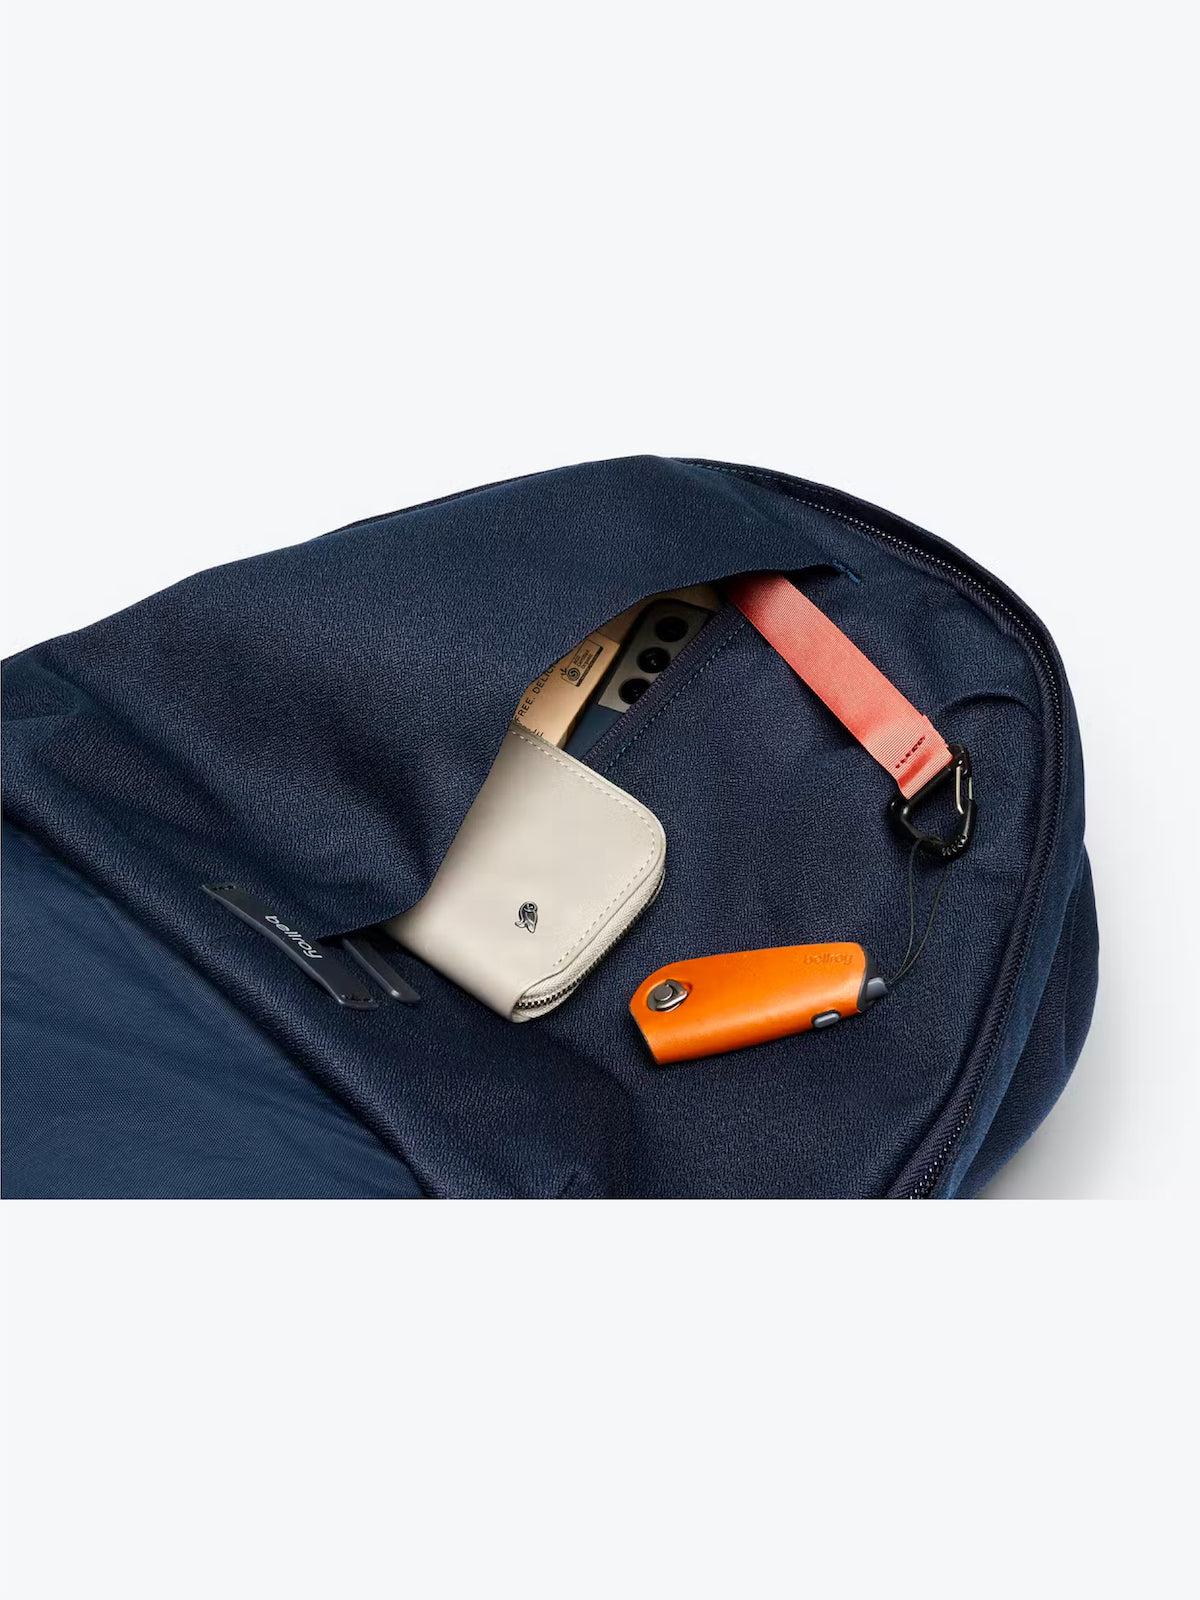 Bellroy Classic Backpack Plus Second Edition Navy